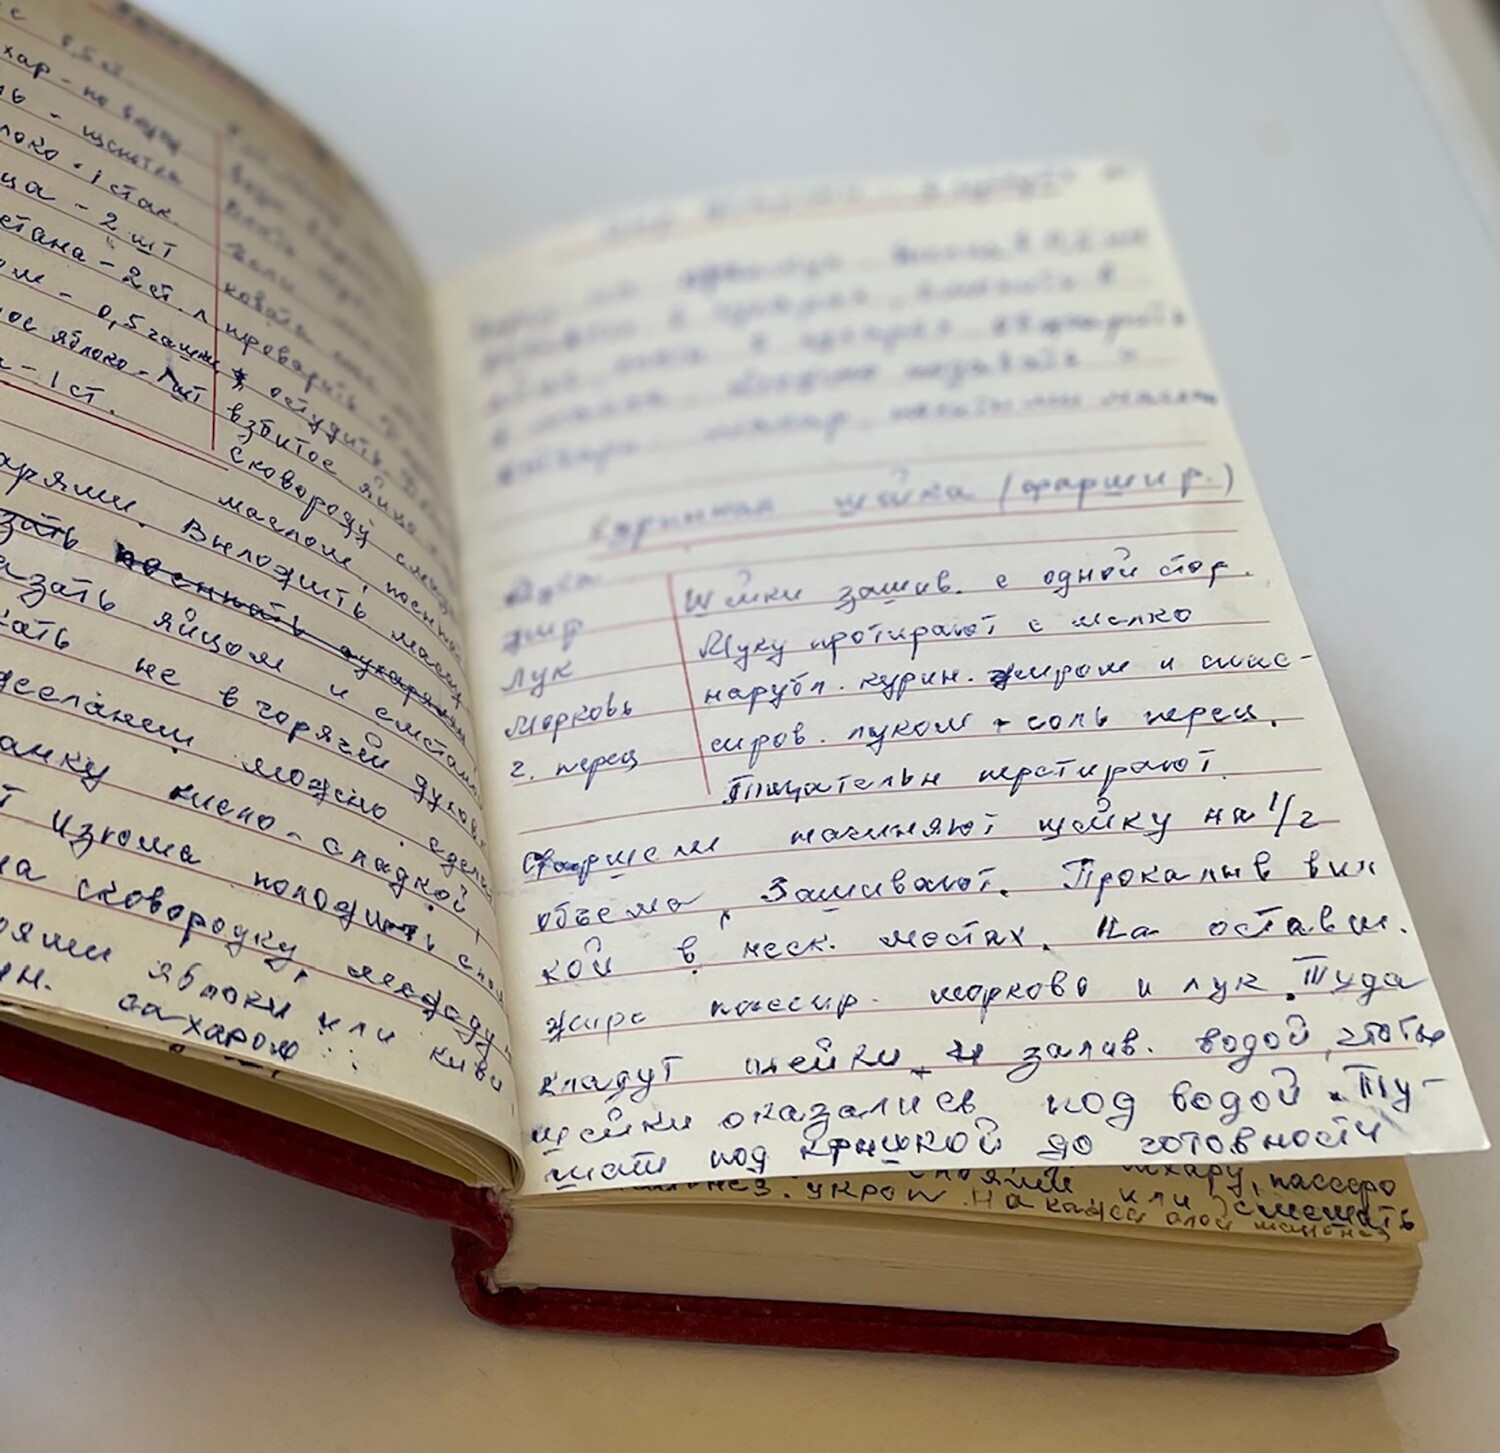 Op-Ed: A notebook with family recipes reminds me of Ukraine's strength